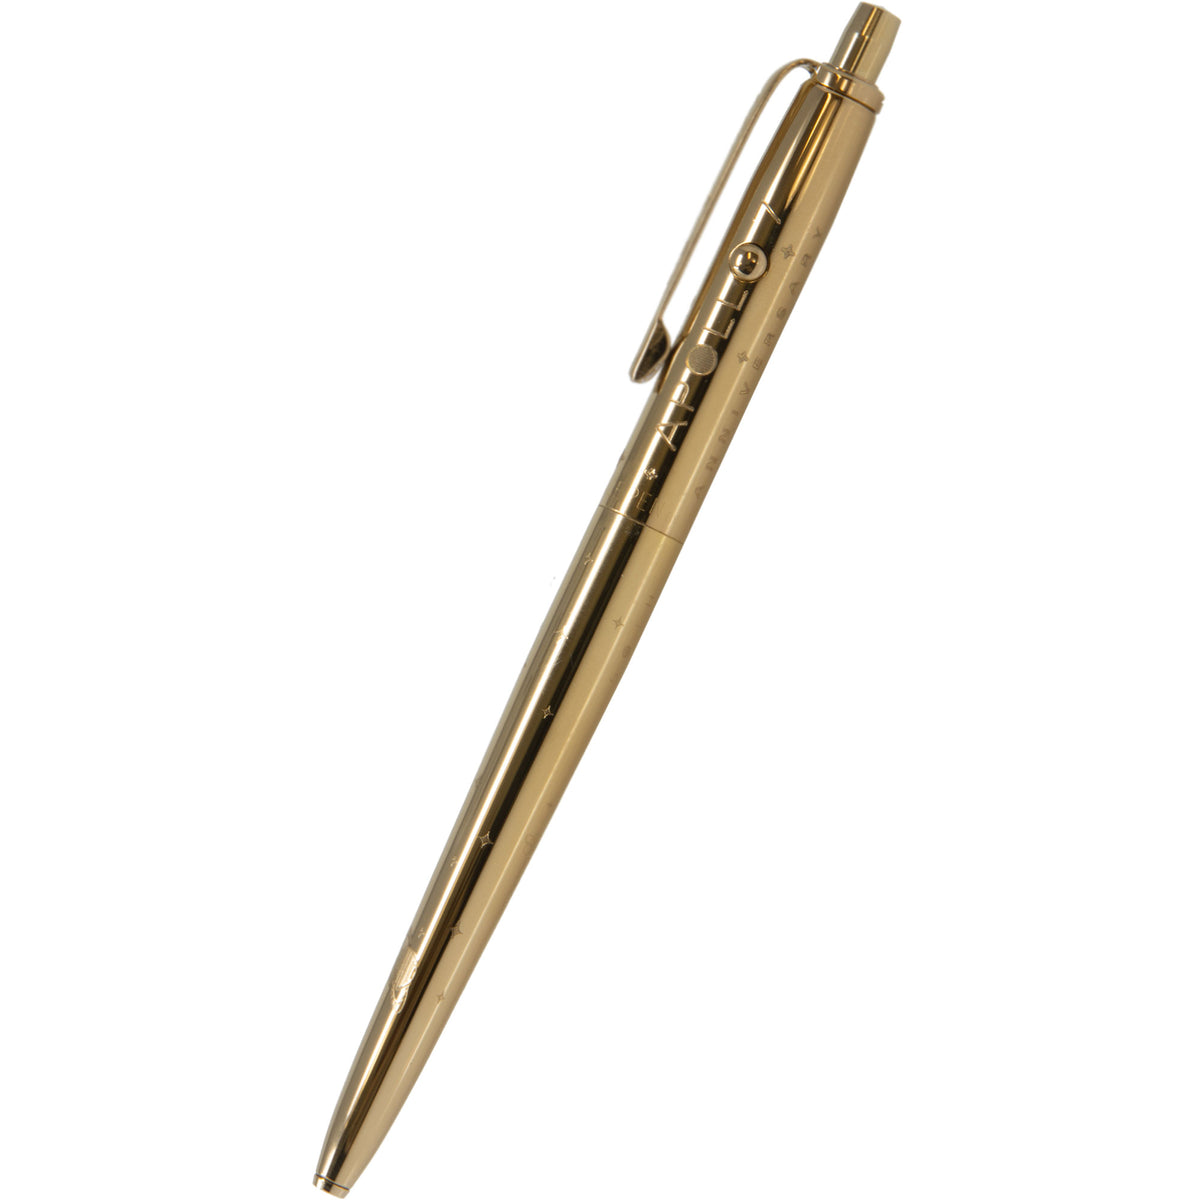 Shop online at Fisher Space Limited Edition Gold Titanium Nitride Astronaut  Space Pen & Coin Set Fisher Space Pens . Find the latest trends and brands  today